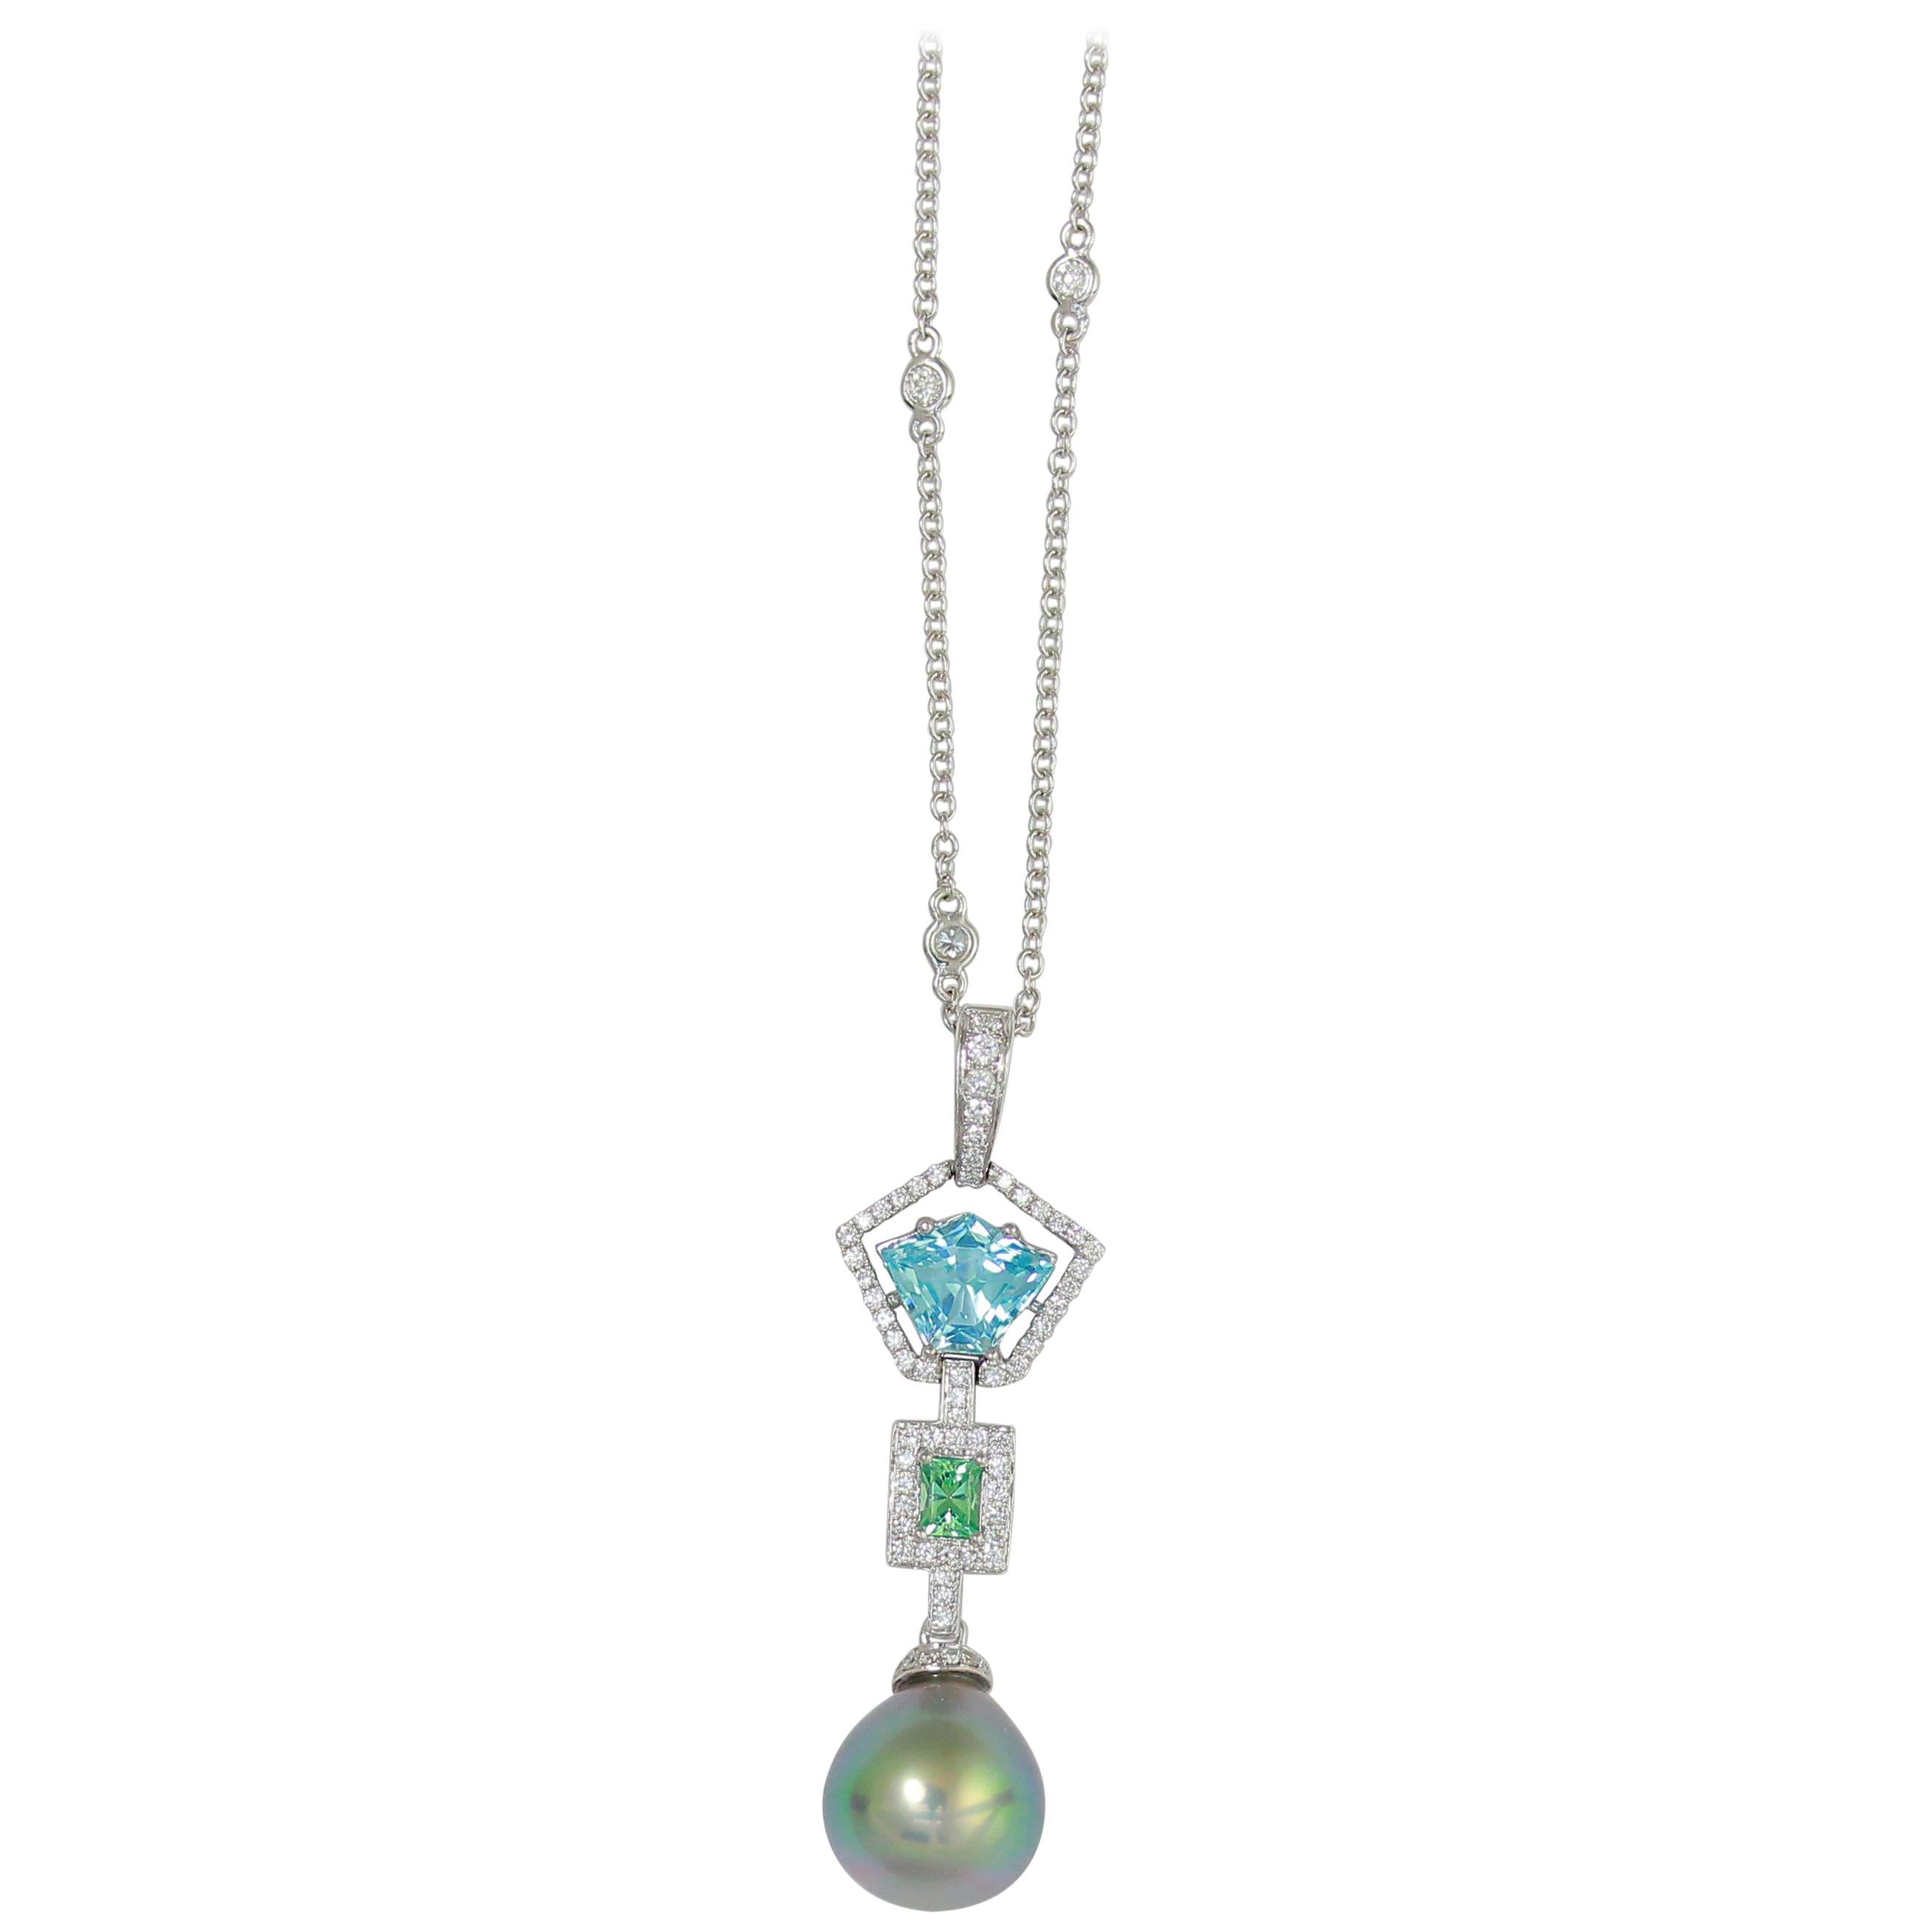 Frederic Sage Blue Topaz, Green Tourmaline and Pearl Pendant